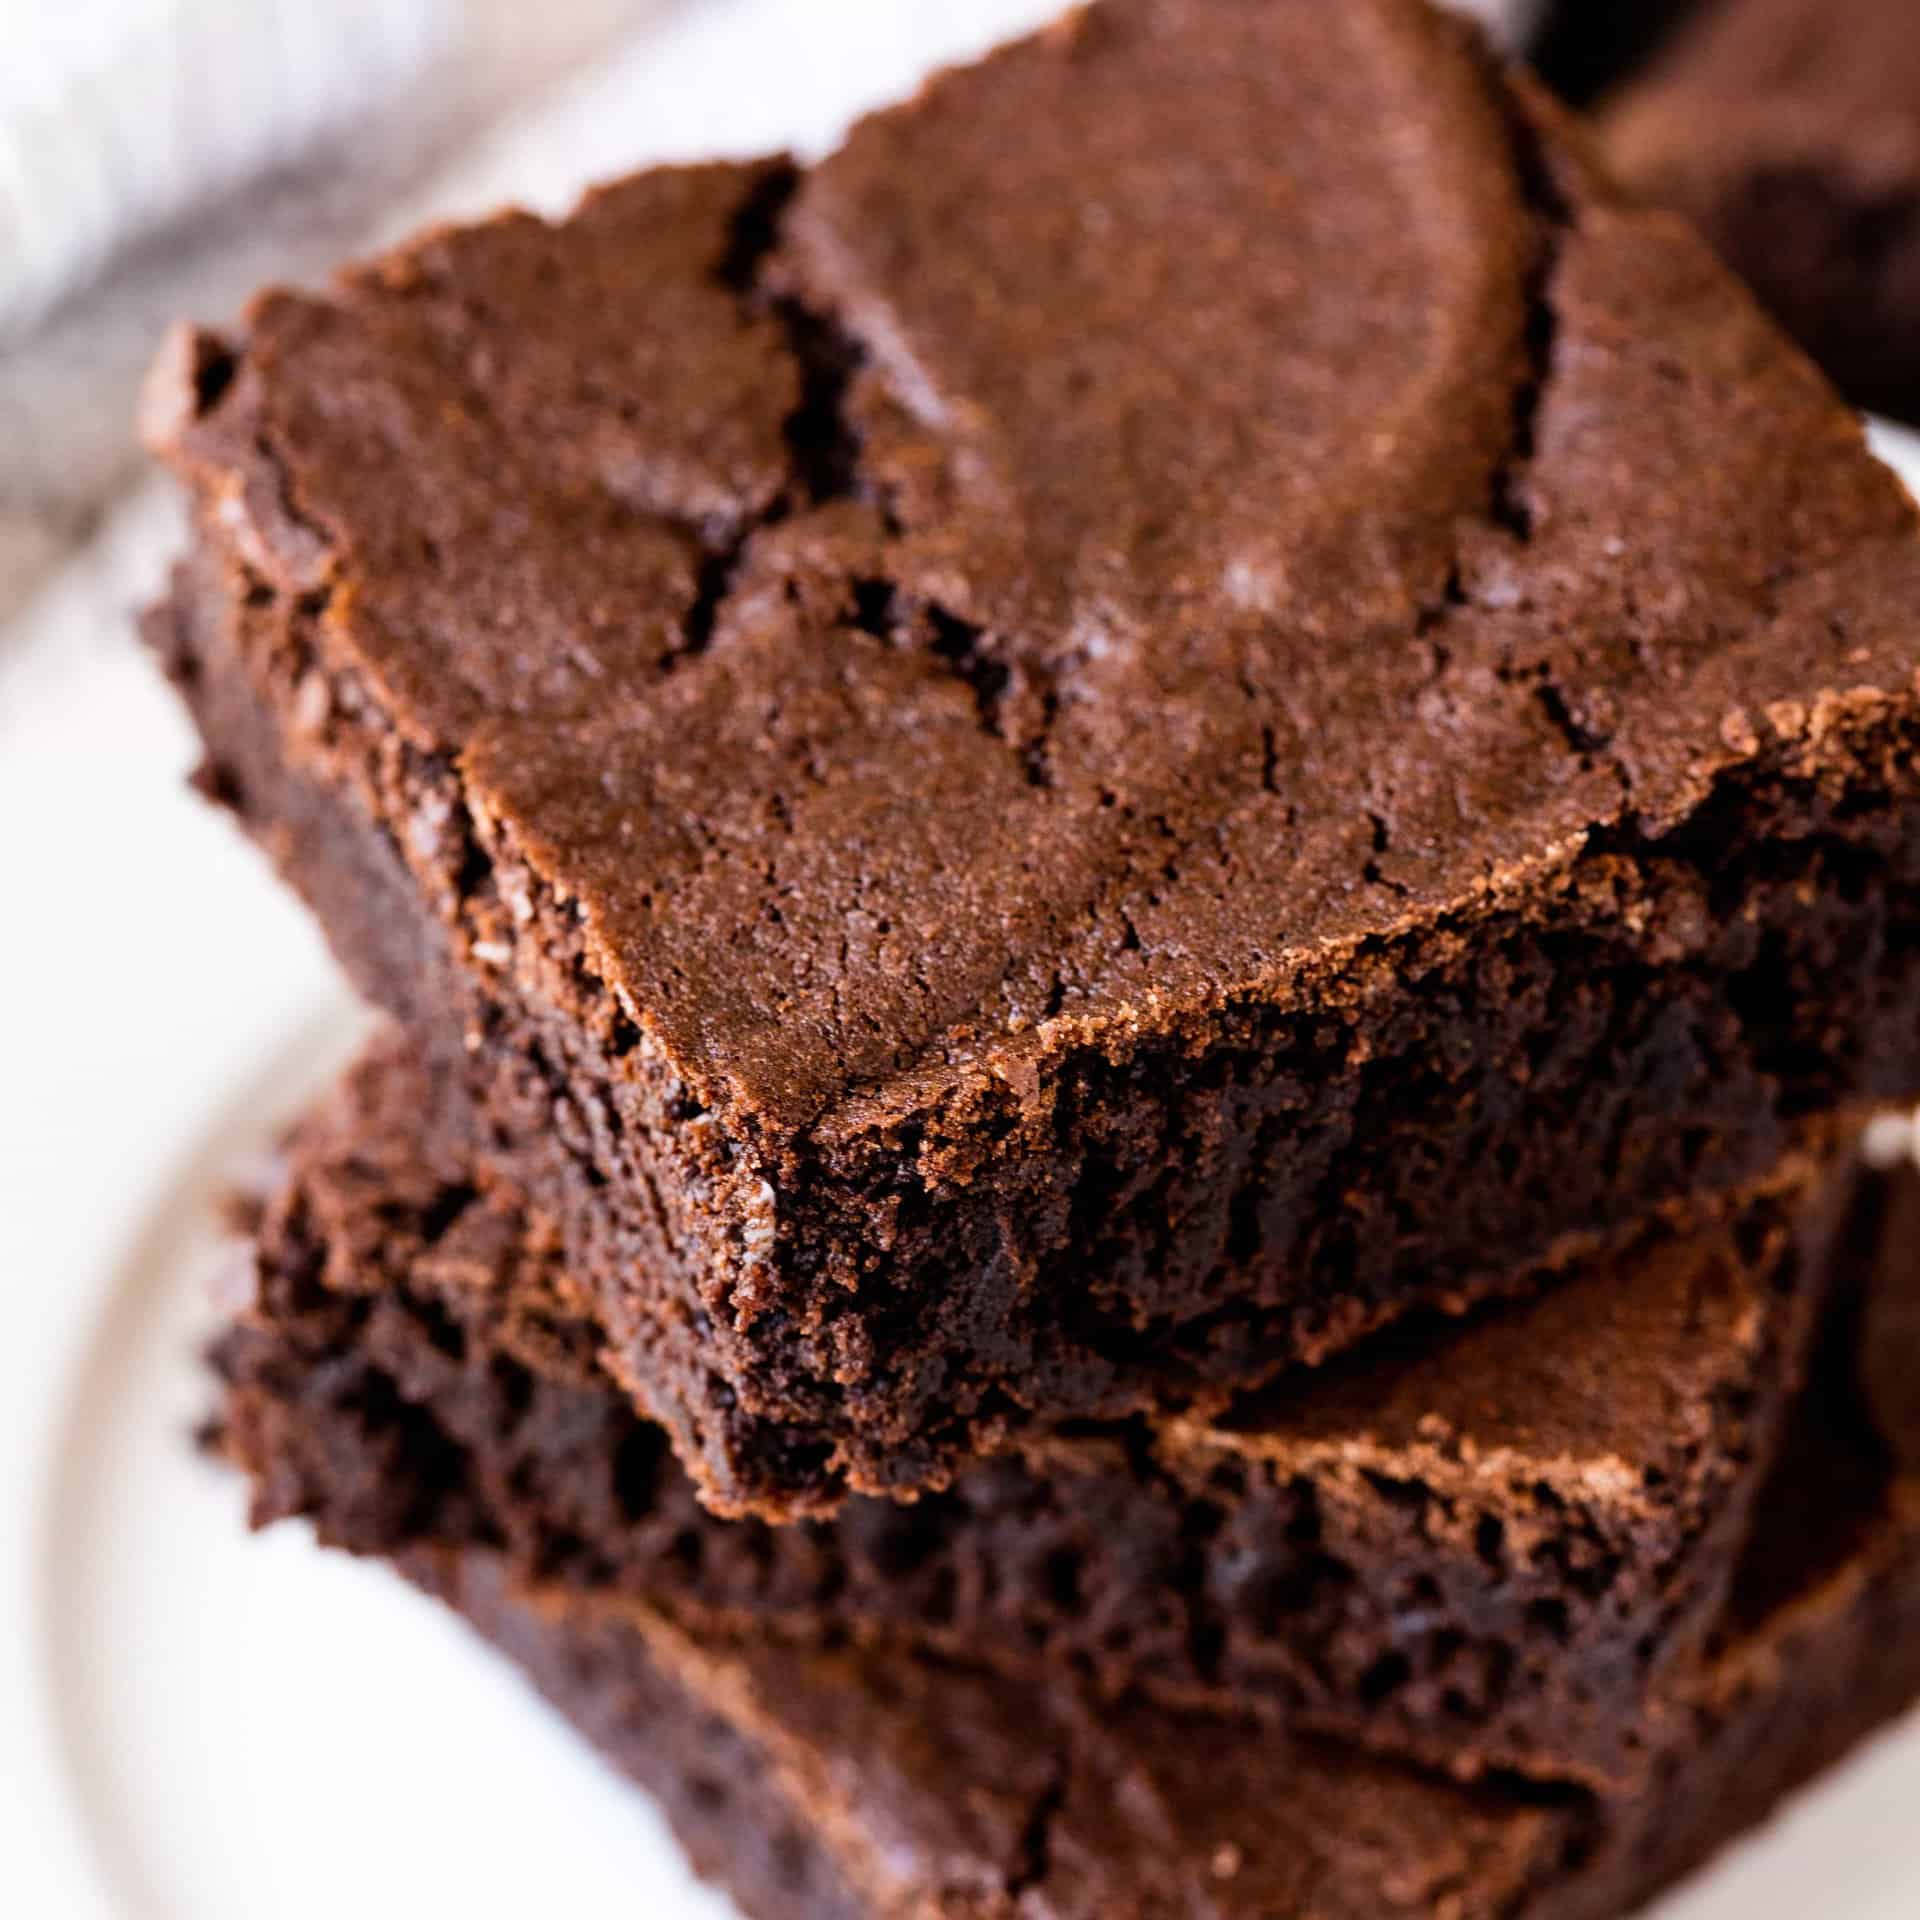 The Most Amazing Brownies are the perfect chewy fudge squares of chocolate. You'll never buy a boxed brownie mix again! You can make these brownies with either baking chocolate or cocoa powder too!